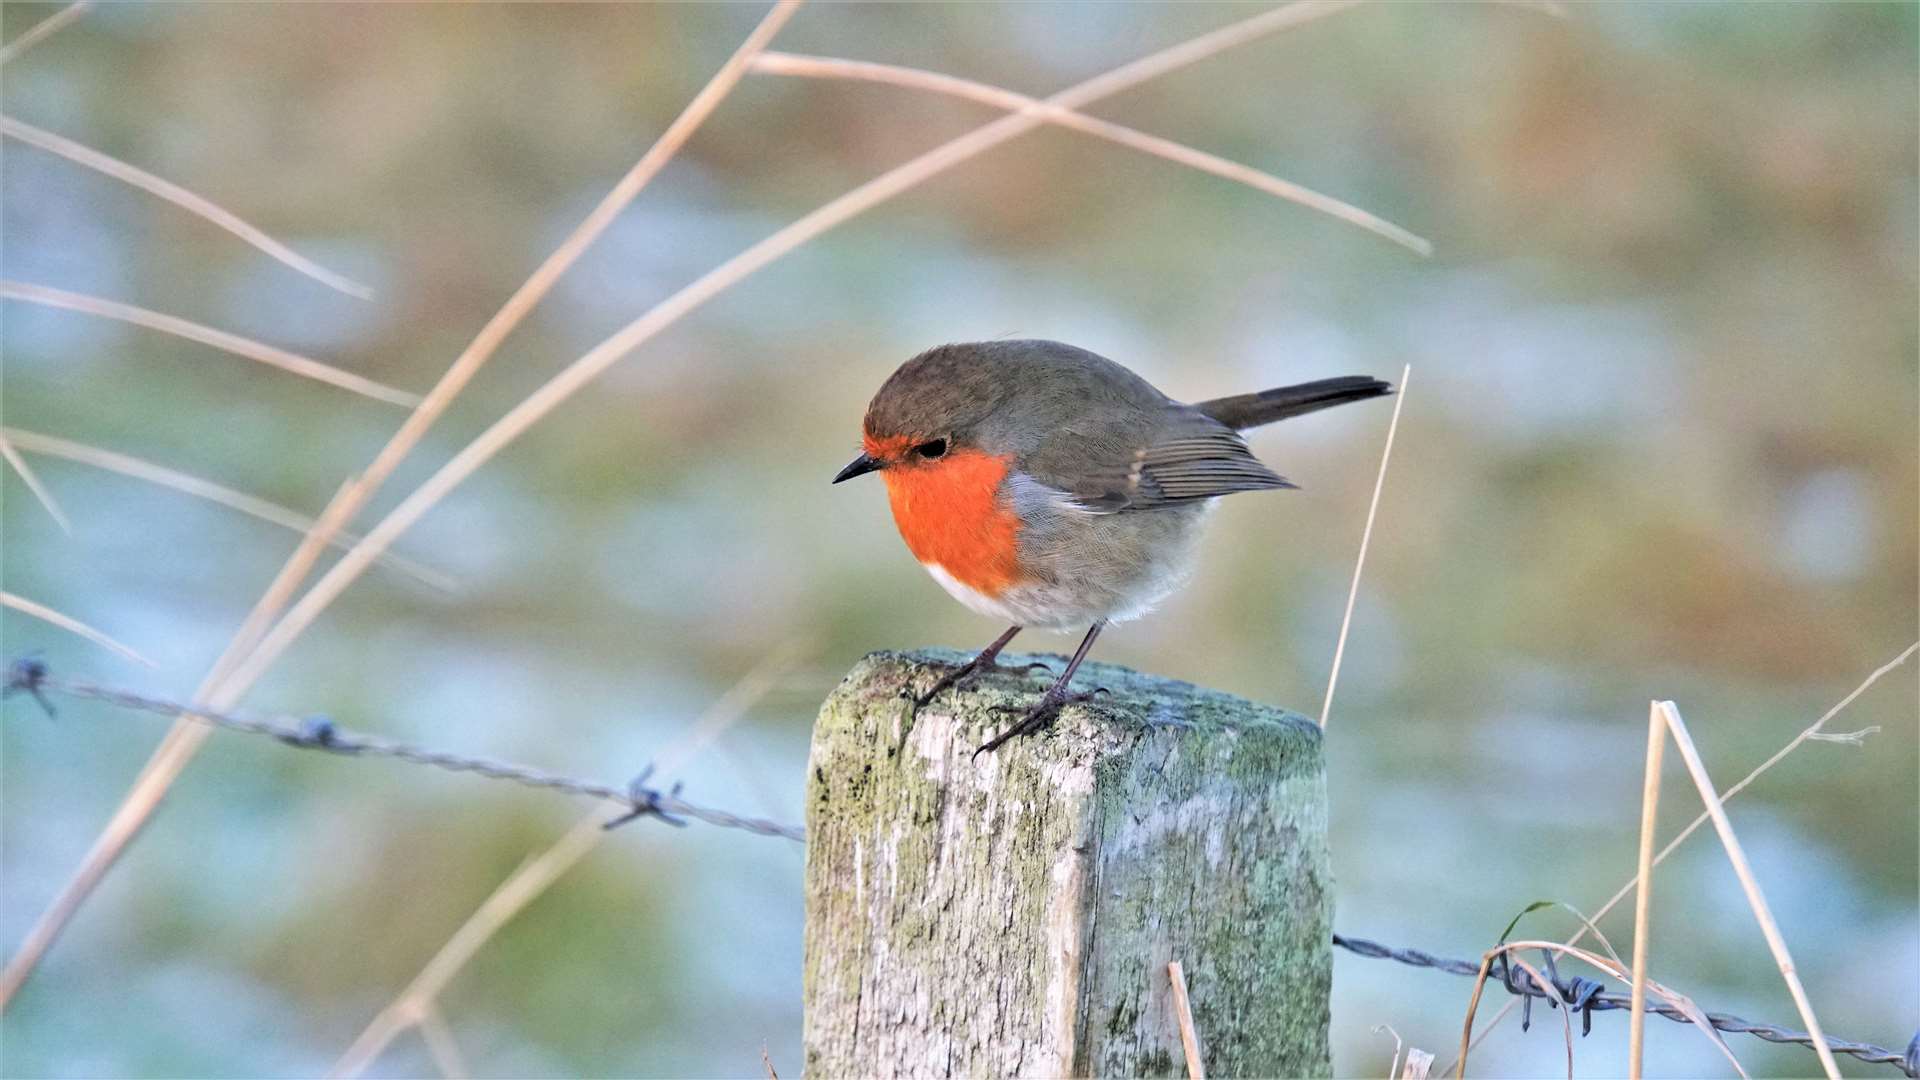 This friendly robin seemed to pose for a photograph while standing on a fence post near Wick river. Pictures: DGS